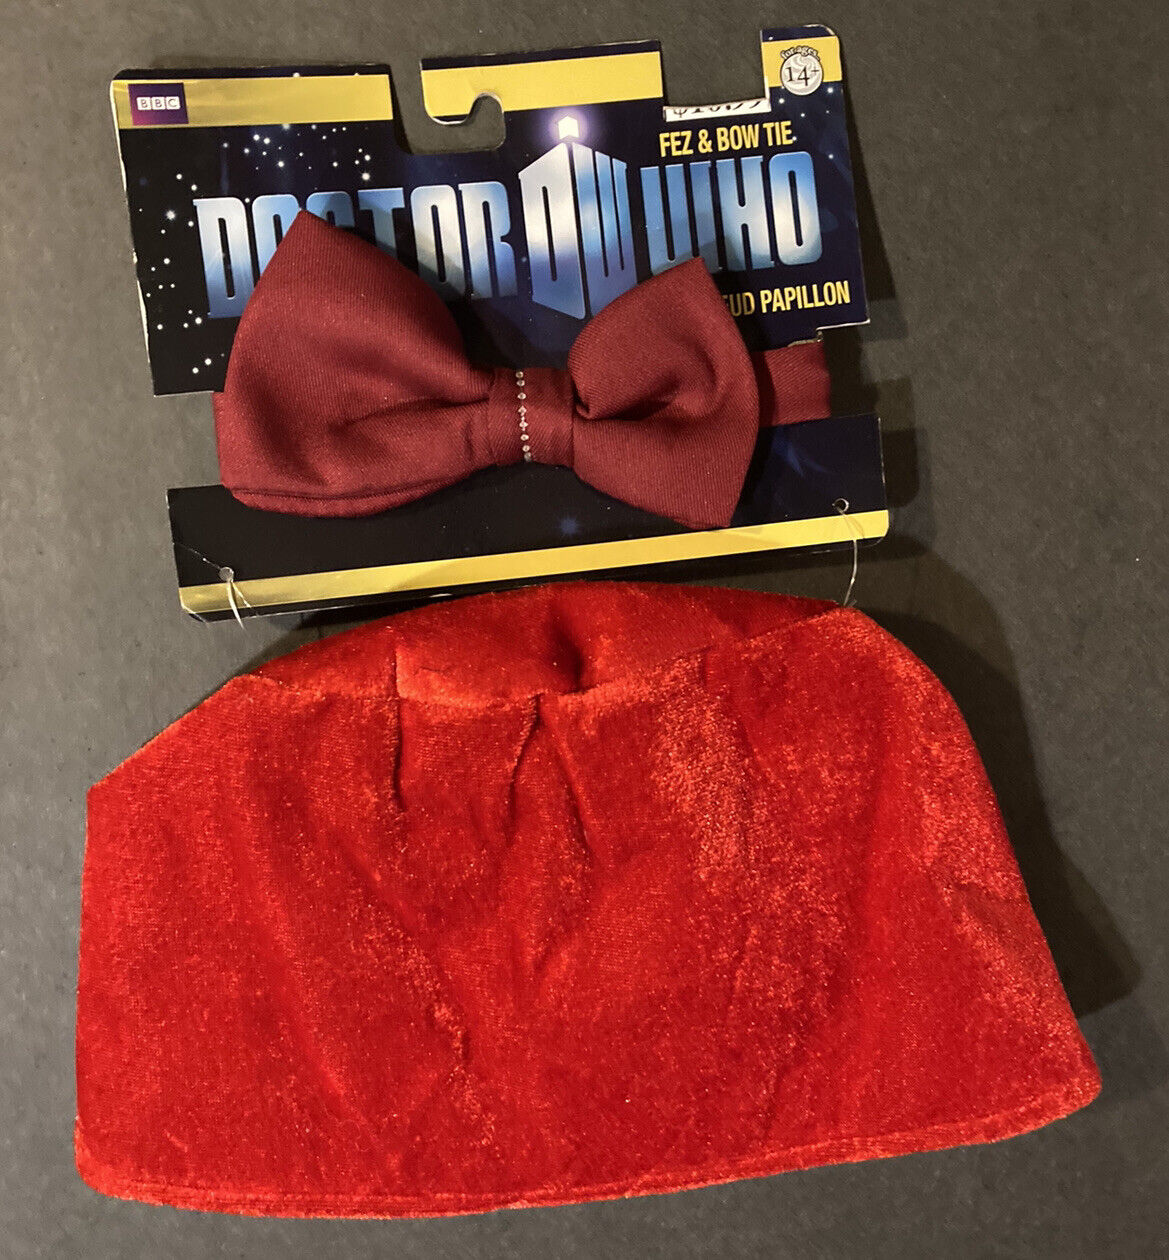 BBC Doctor Dr Who Unisex Costume Accessoru Cosplay Red Fez Hat Bow Tie Halloween